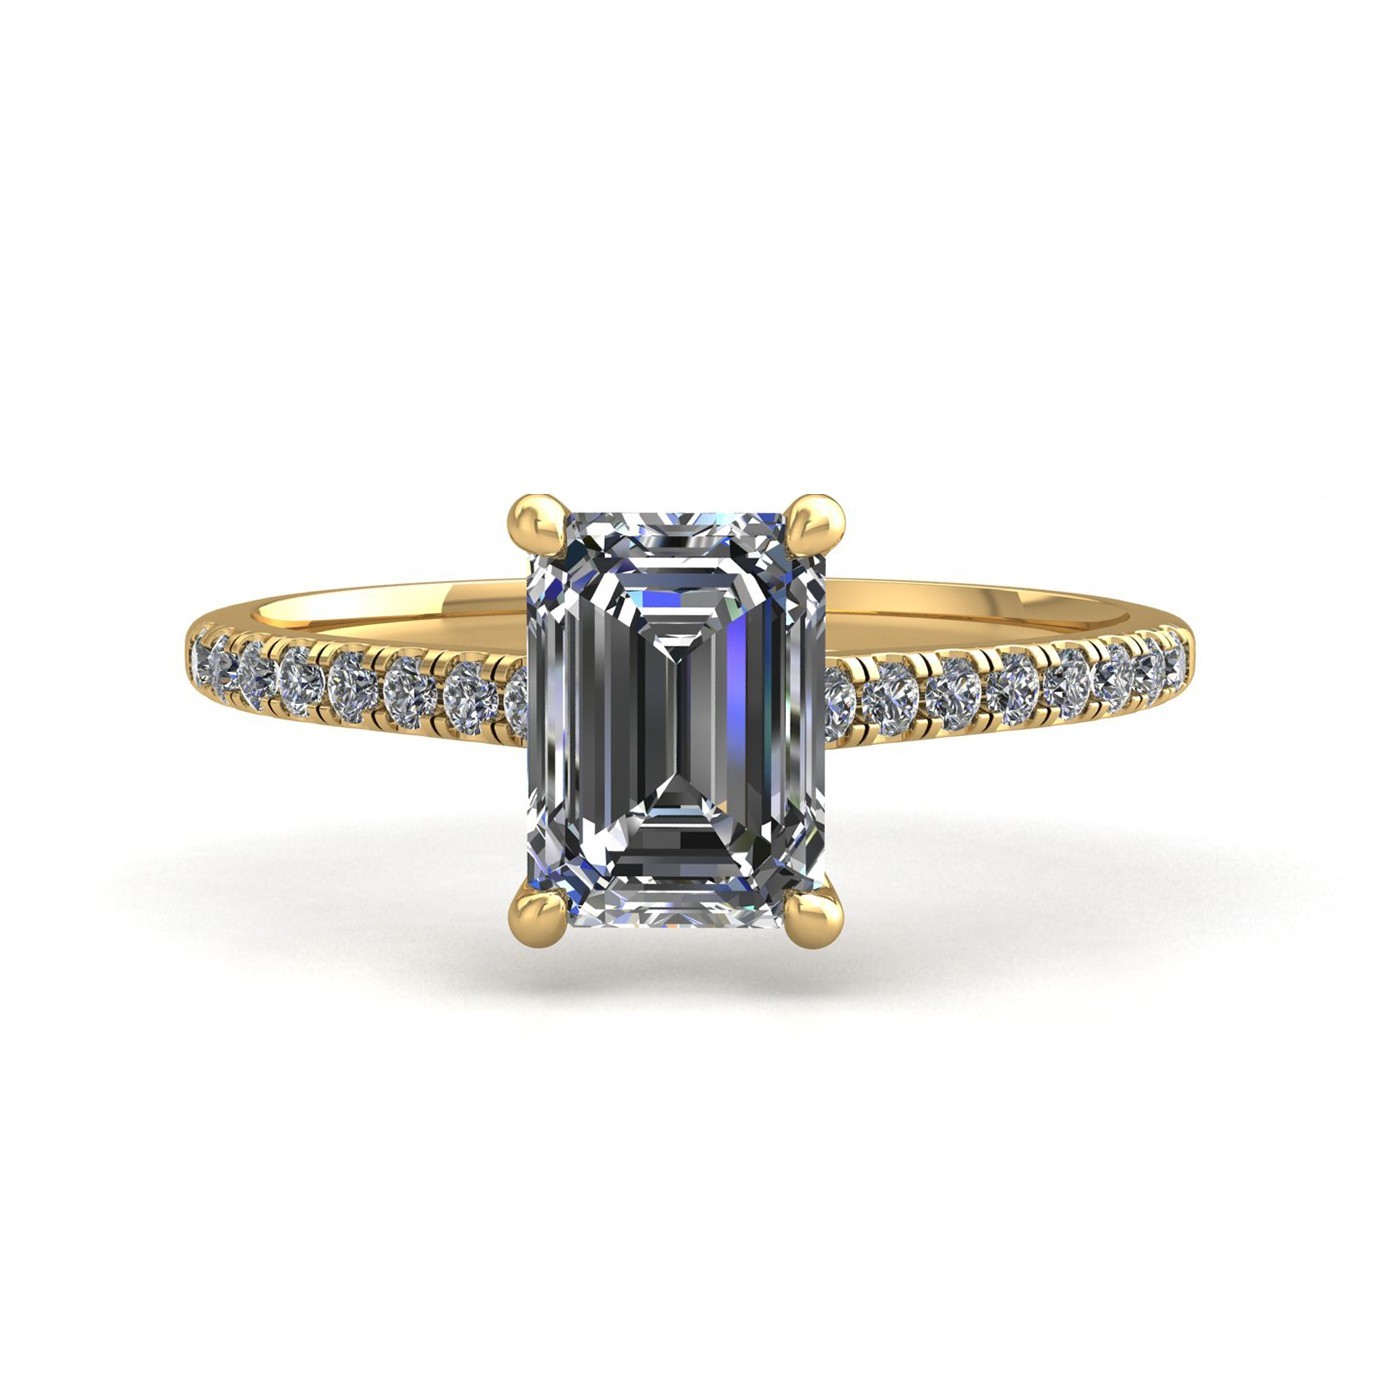 18k yellow gold 0,30 ct 4 prongs emerald cut diamond engagement ring with whisper thin pavÉ set band Photos & images